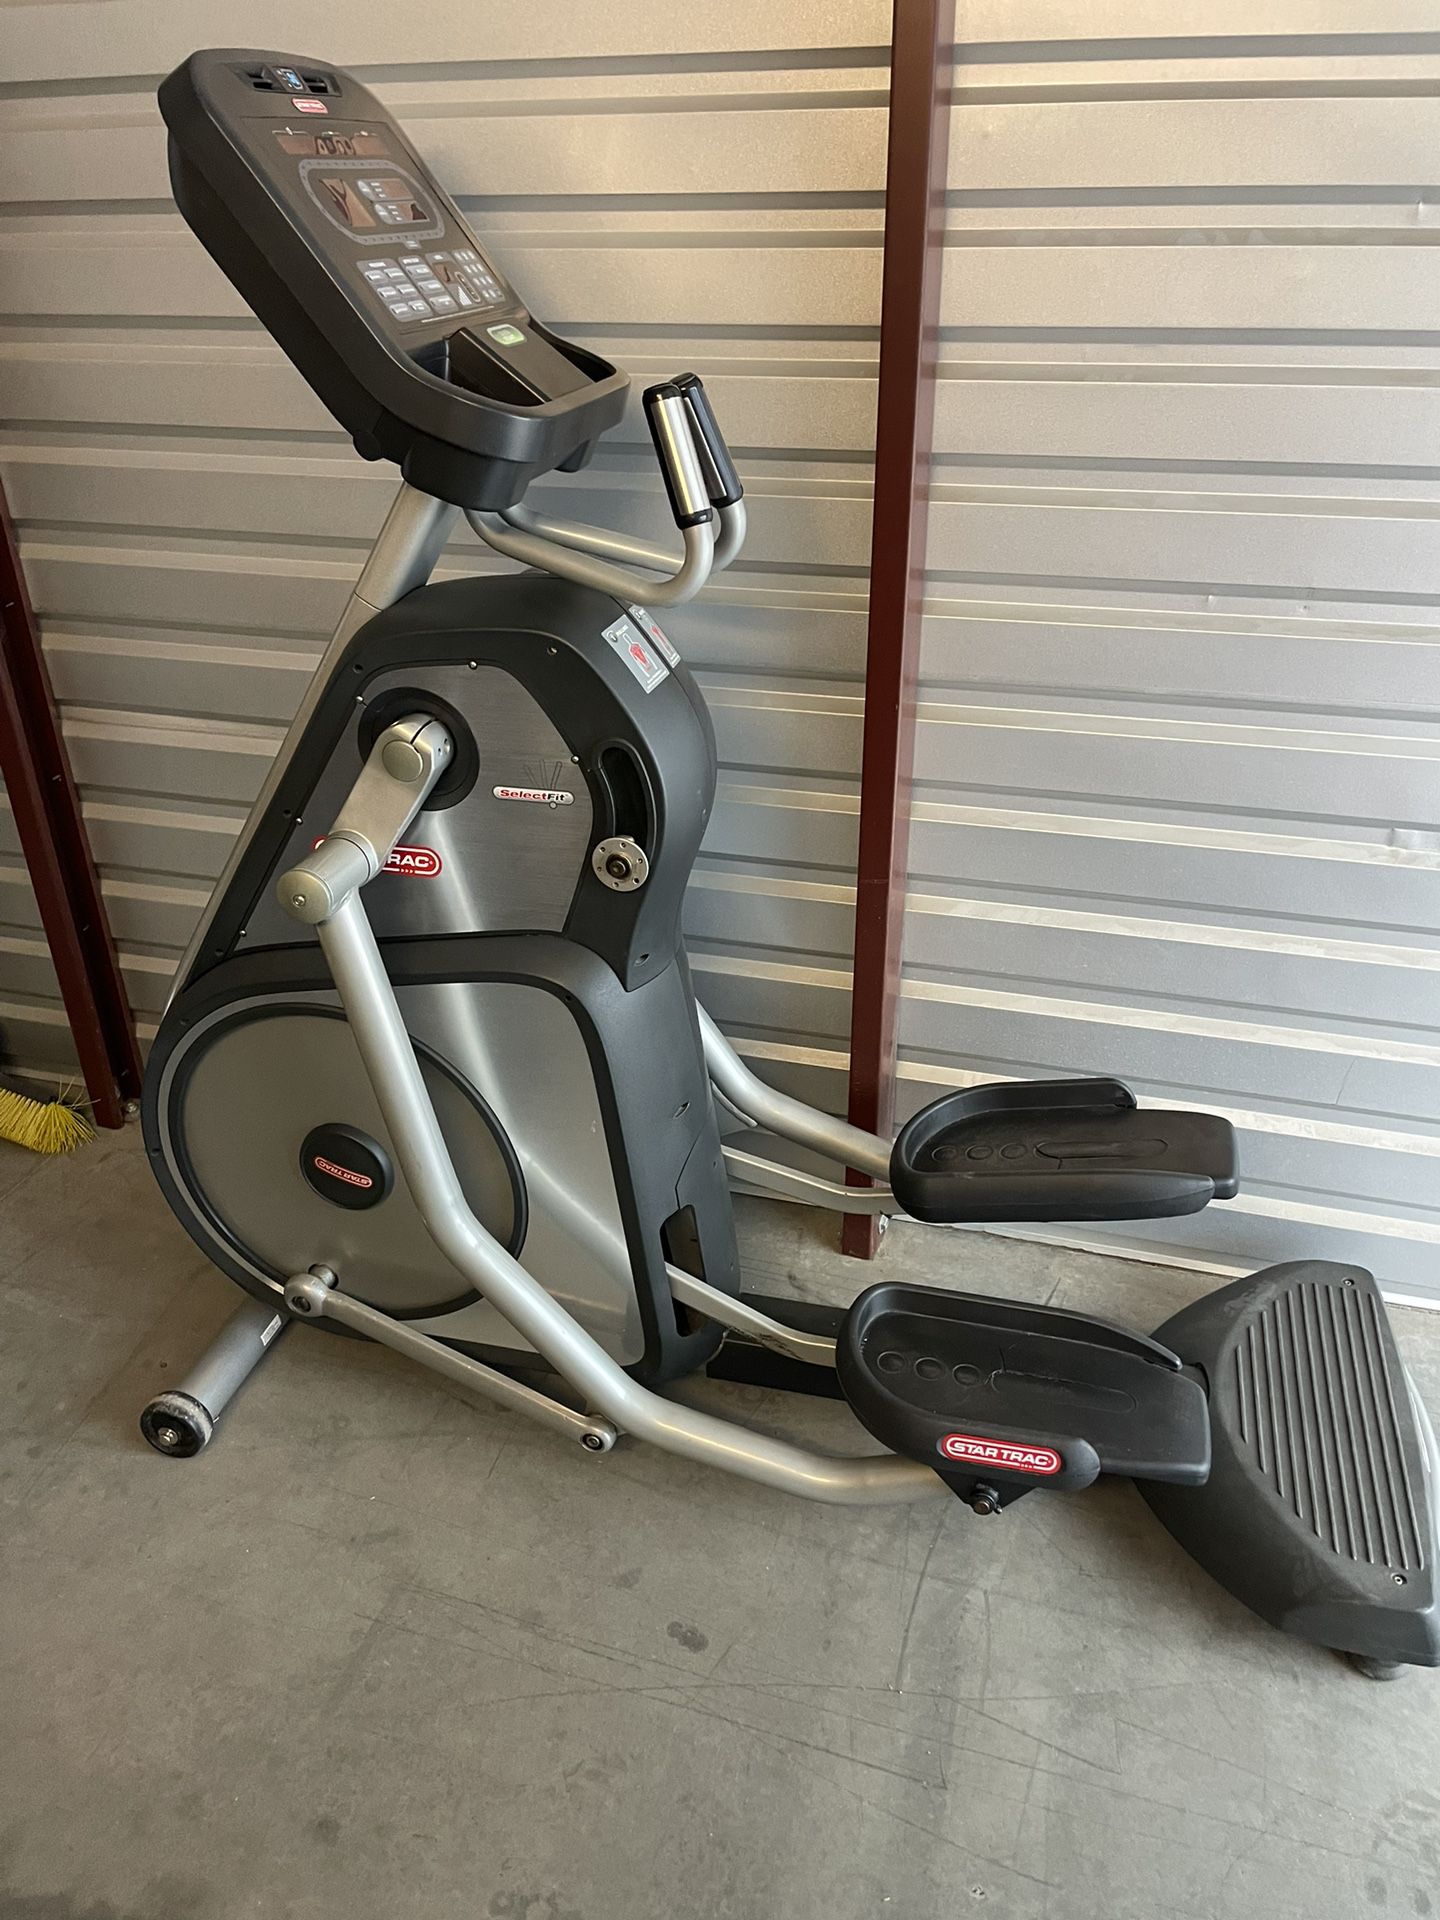 Commercial-grade Star Trac Elliptical. Sturdy, quiet, and powerful. —- Can Deliver / Install